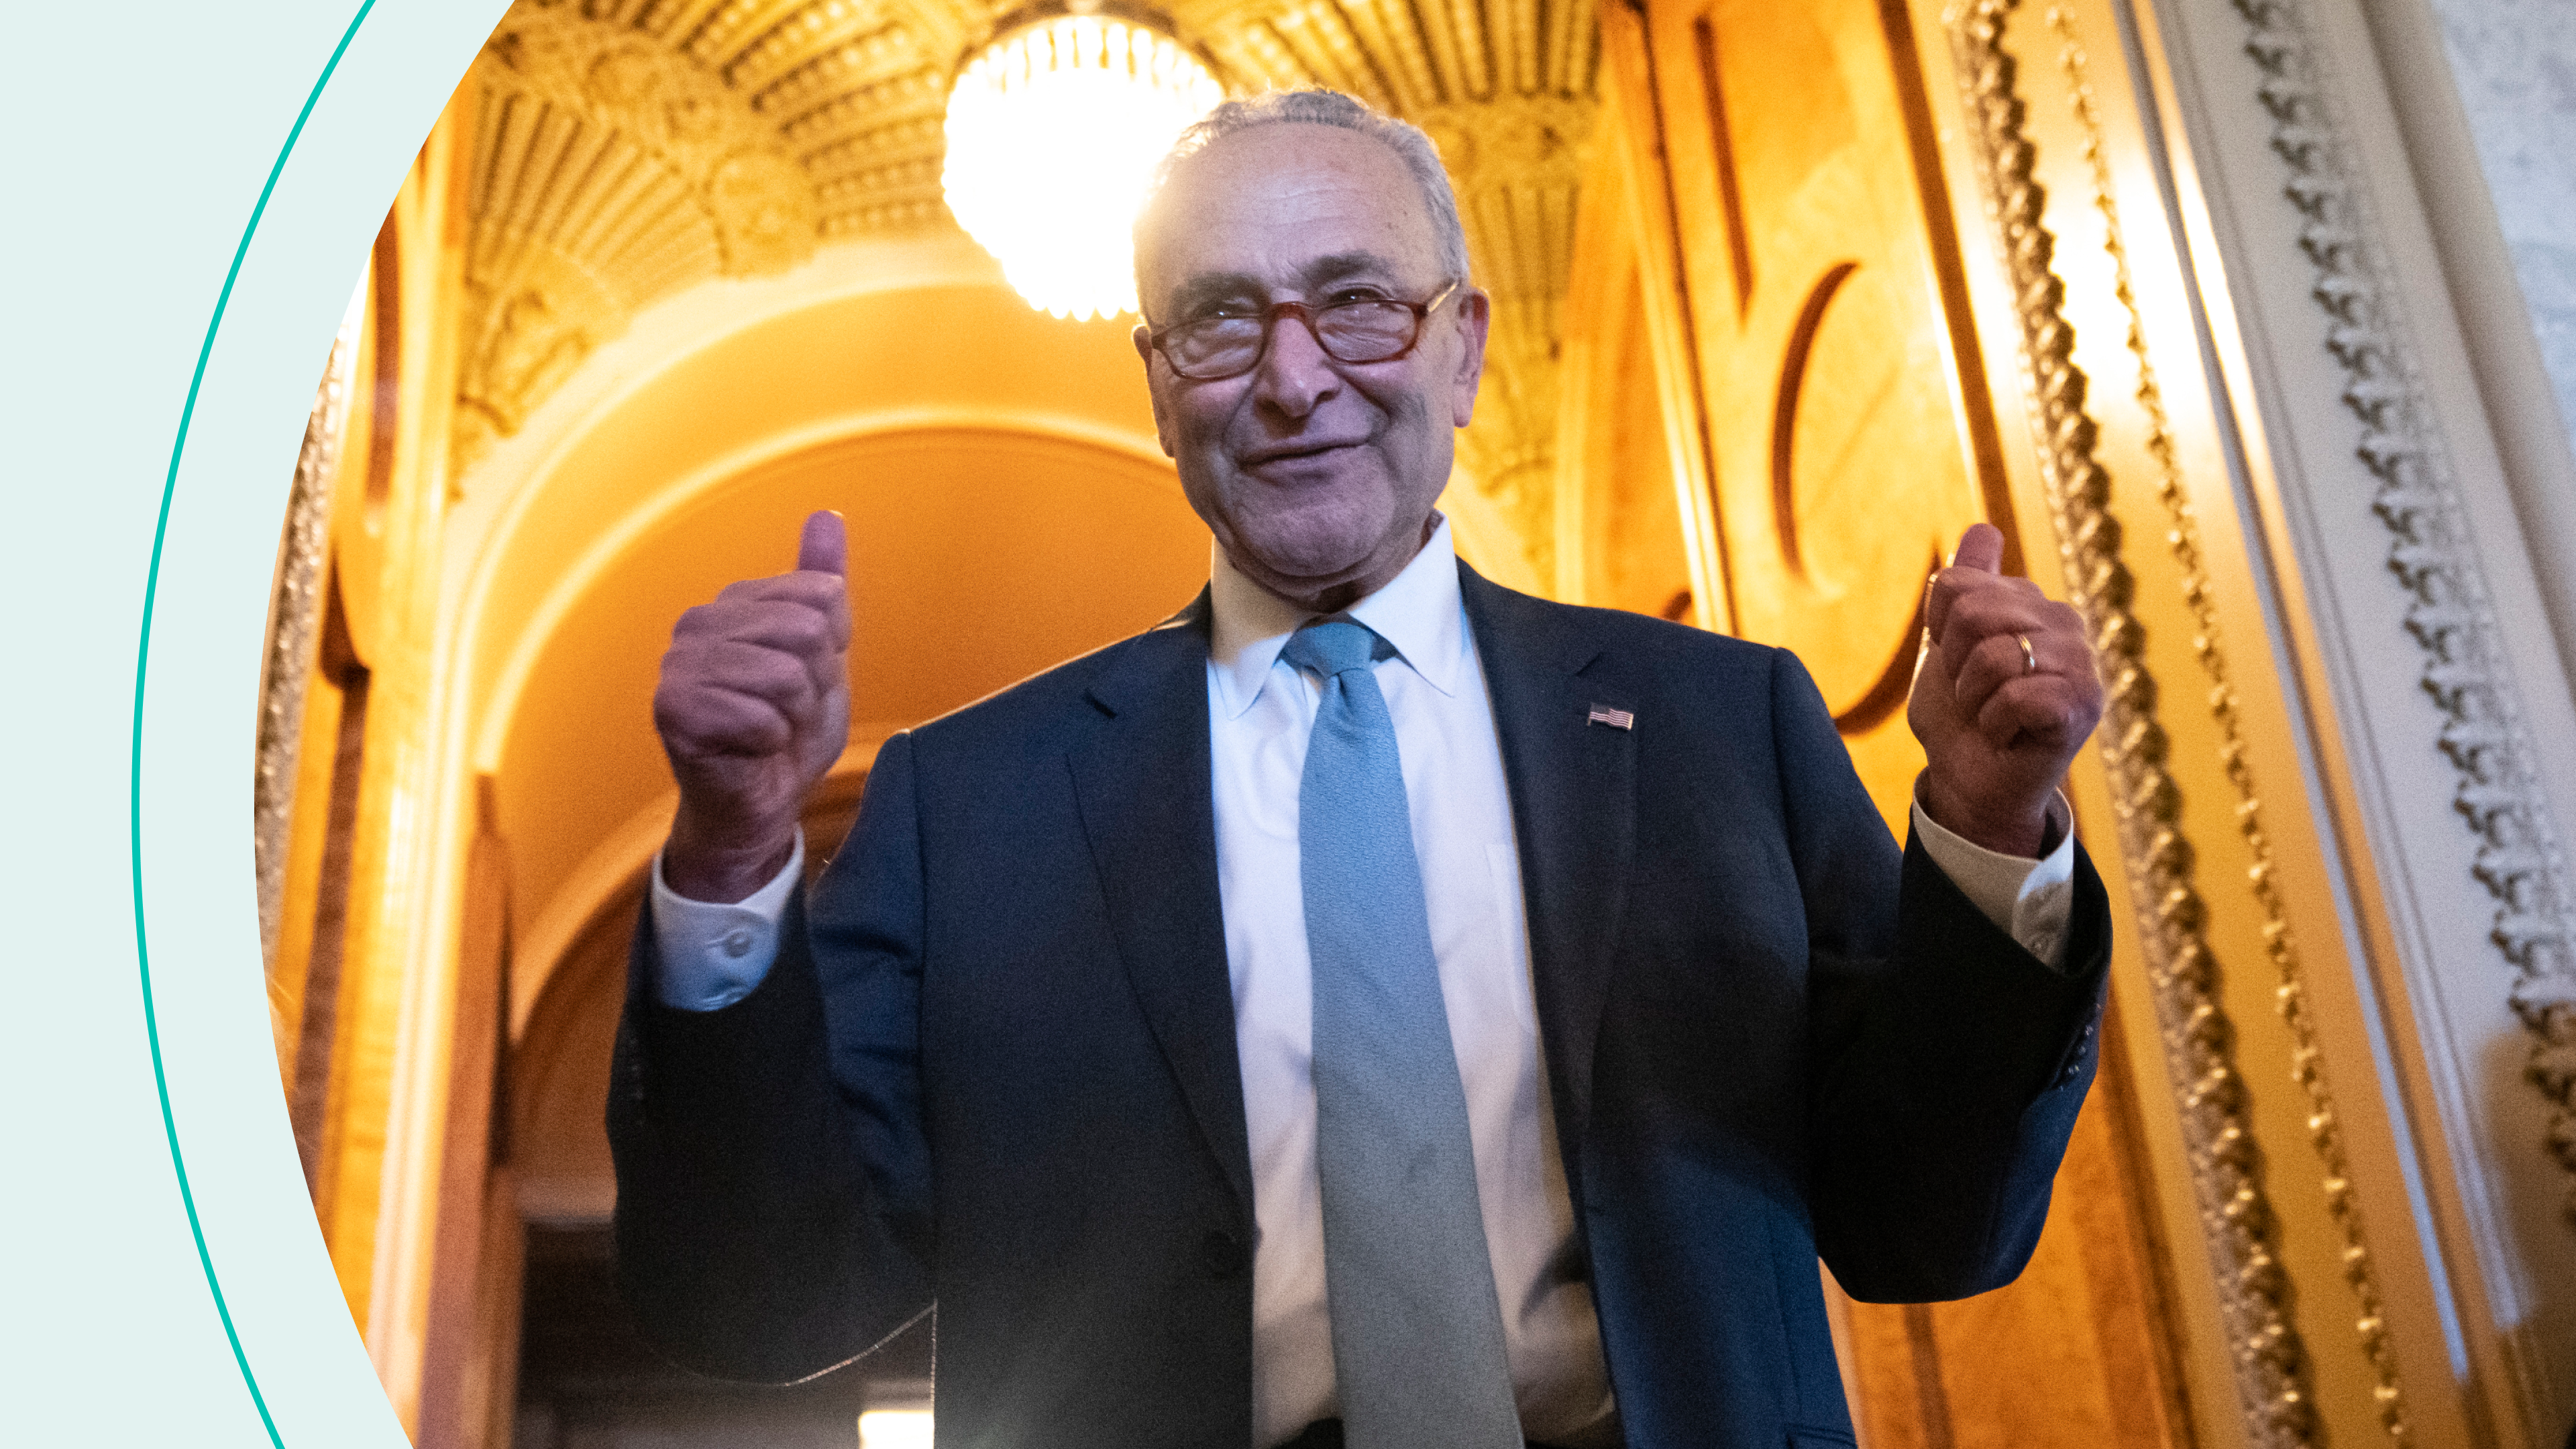 Senate Majority Leader Chuck Schumer (D-NY) gives the thumbs up as he leaves the Senate Chamber 